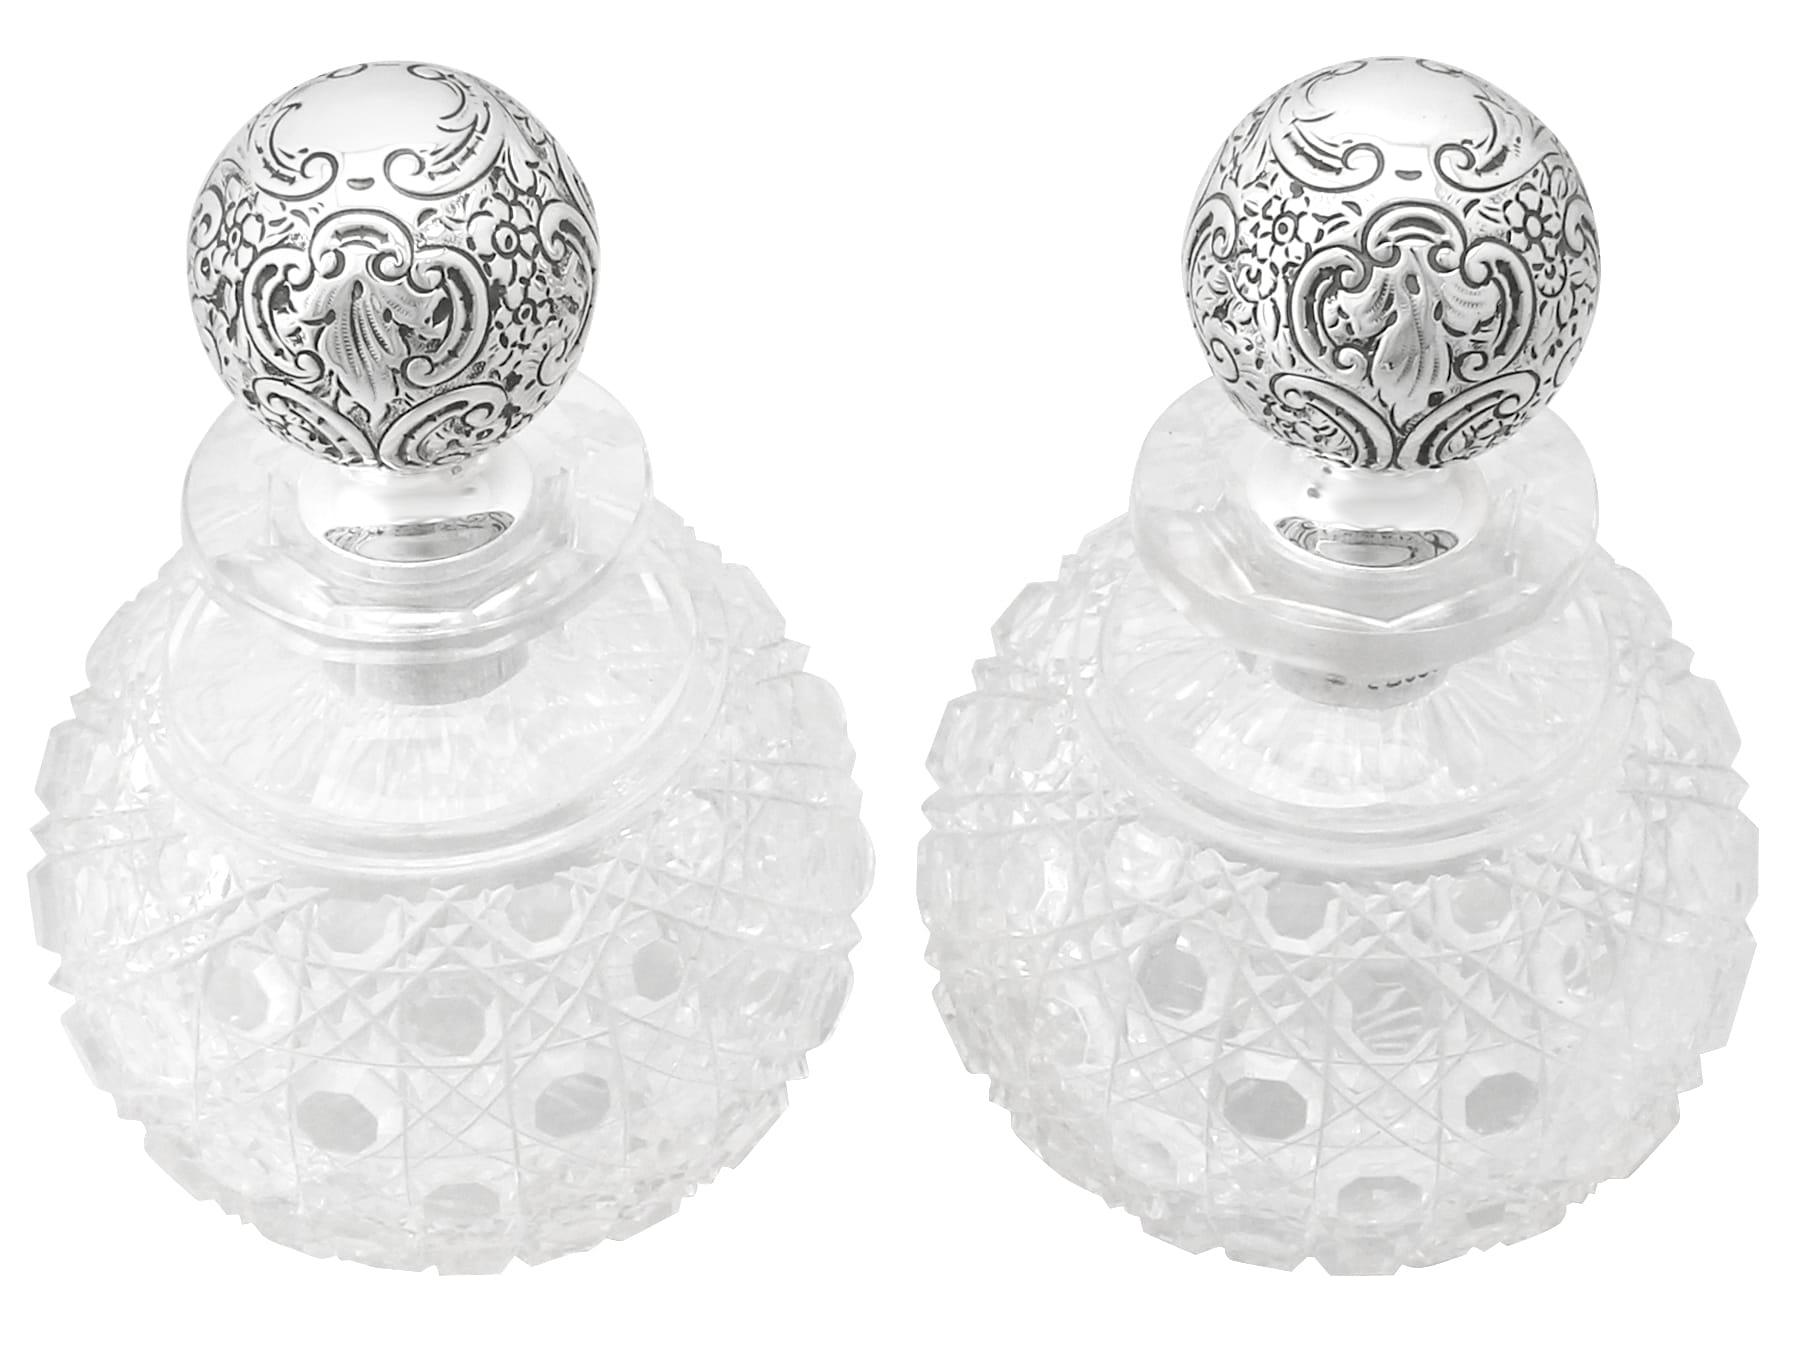 An exceptional, fine and impressive pair of large antique Victorian English sterling silver and cut-glass scent bottles; an addition to our silver mounted glass collection.

These exceptional antique Victorian cut-glass cologne bottles have a